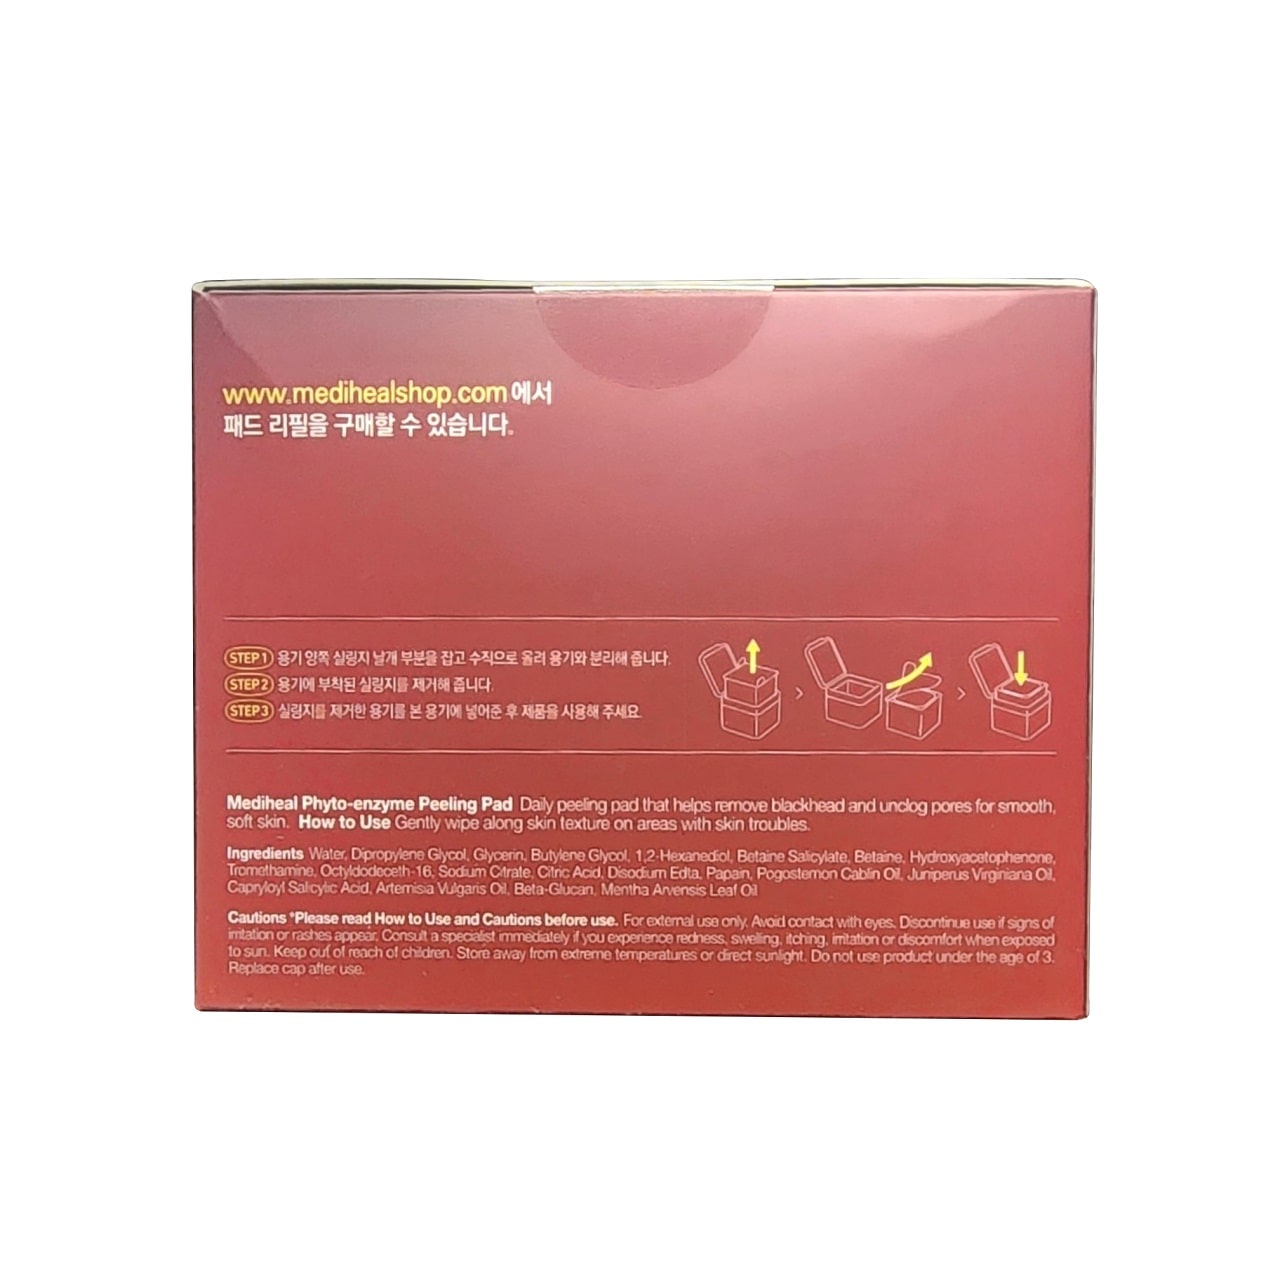 Description, ingredients, cautions for Mediheal Phyto-enzyme Peeling Pads (90 count) in English